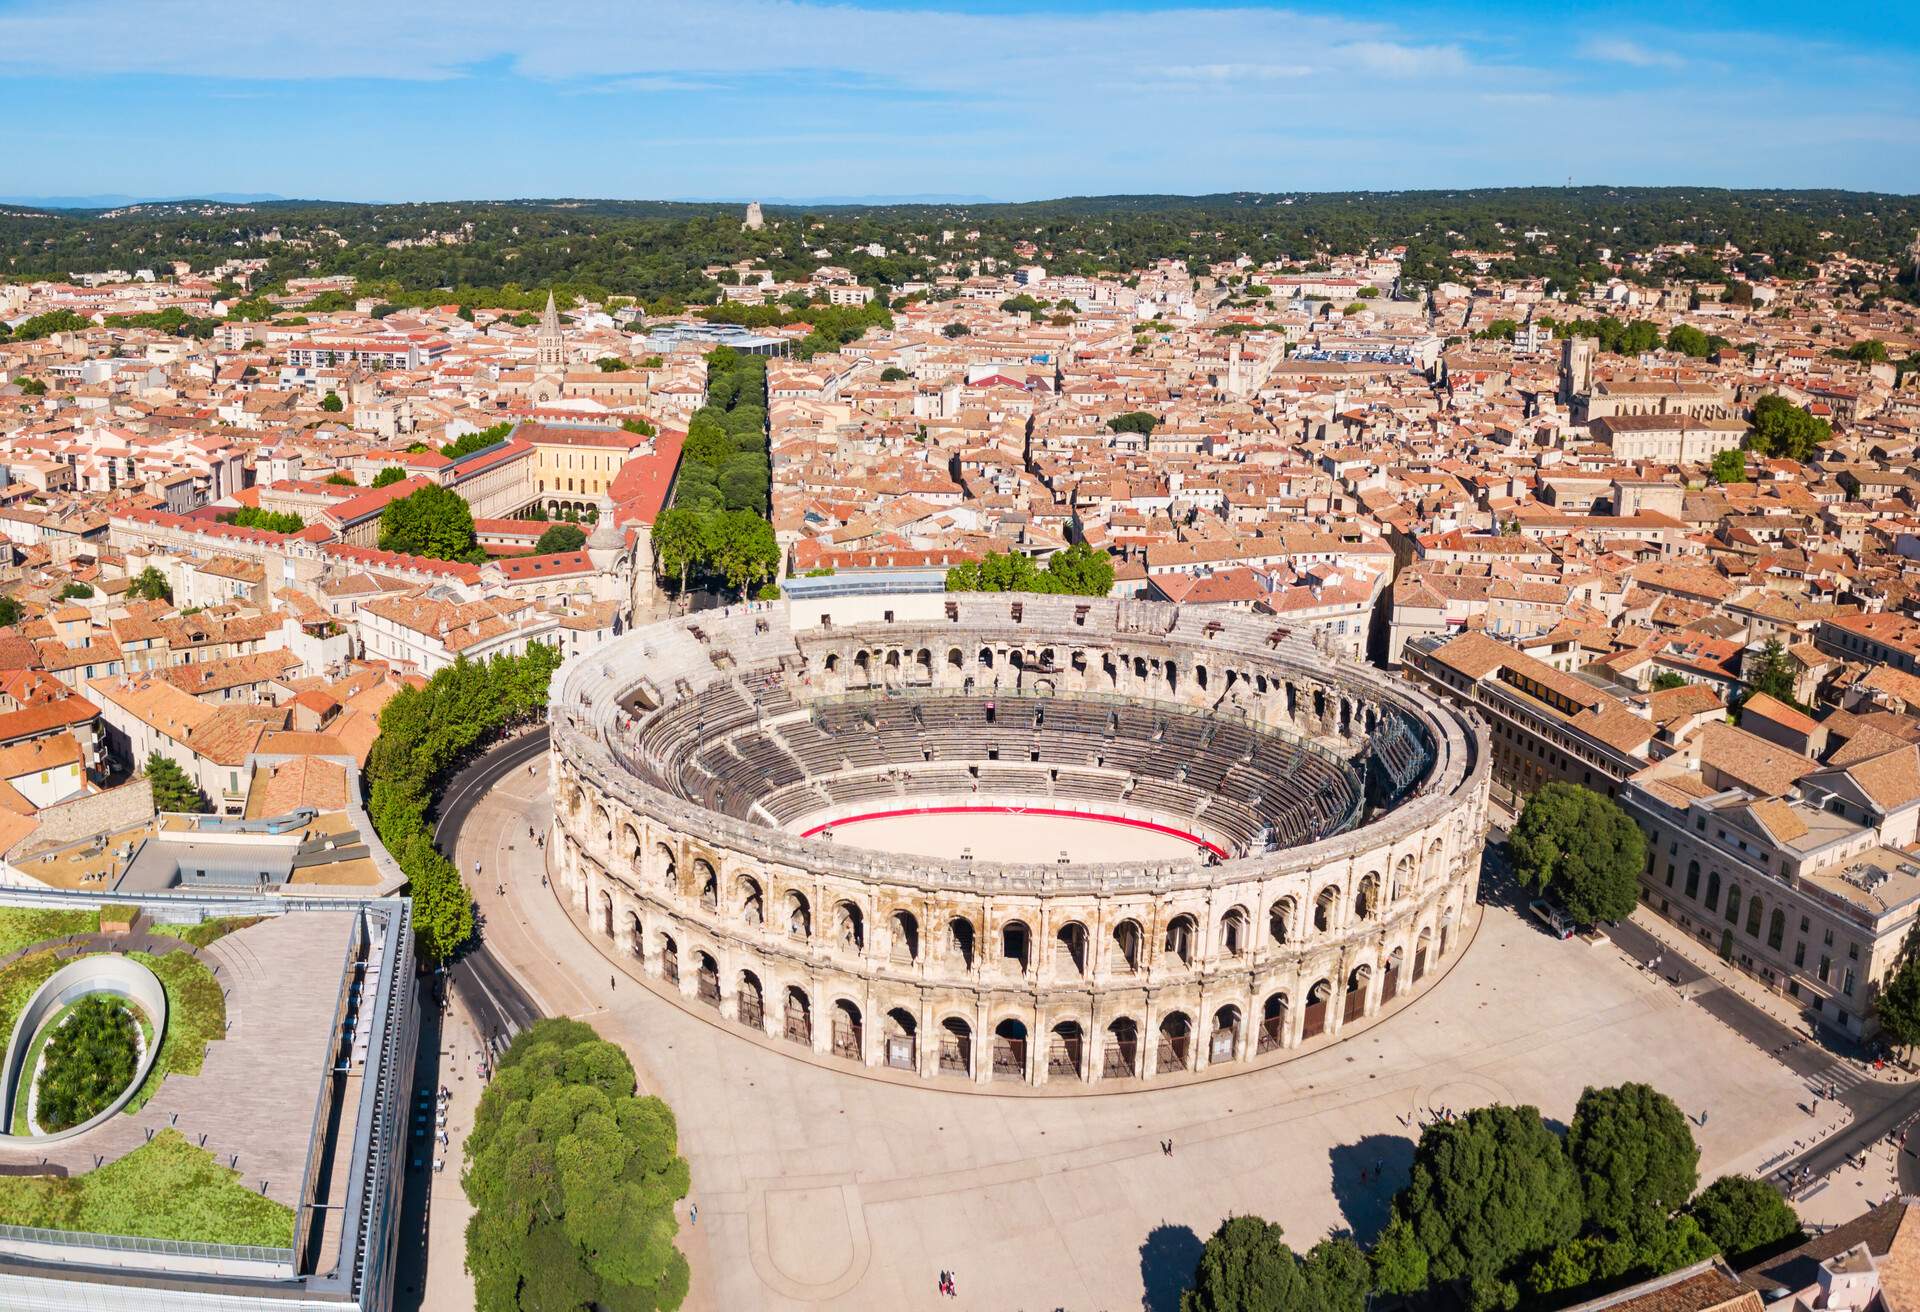 Nimes Arena aerial panoramic view. Nimes is a city in the Occitanie region of southern France